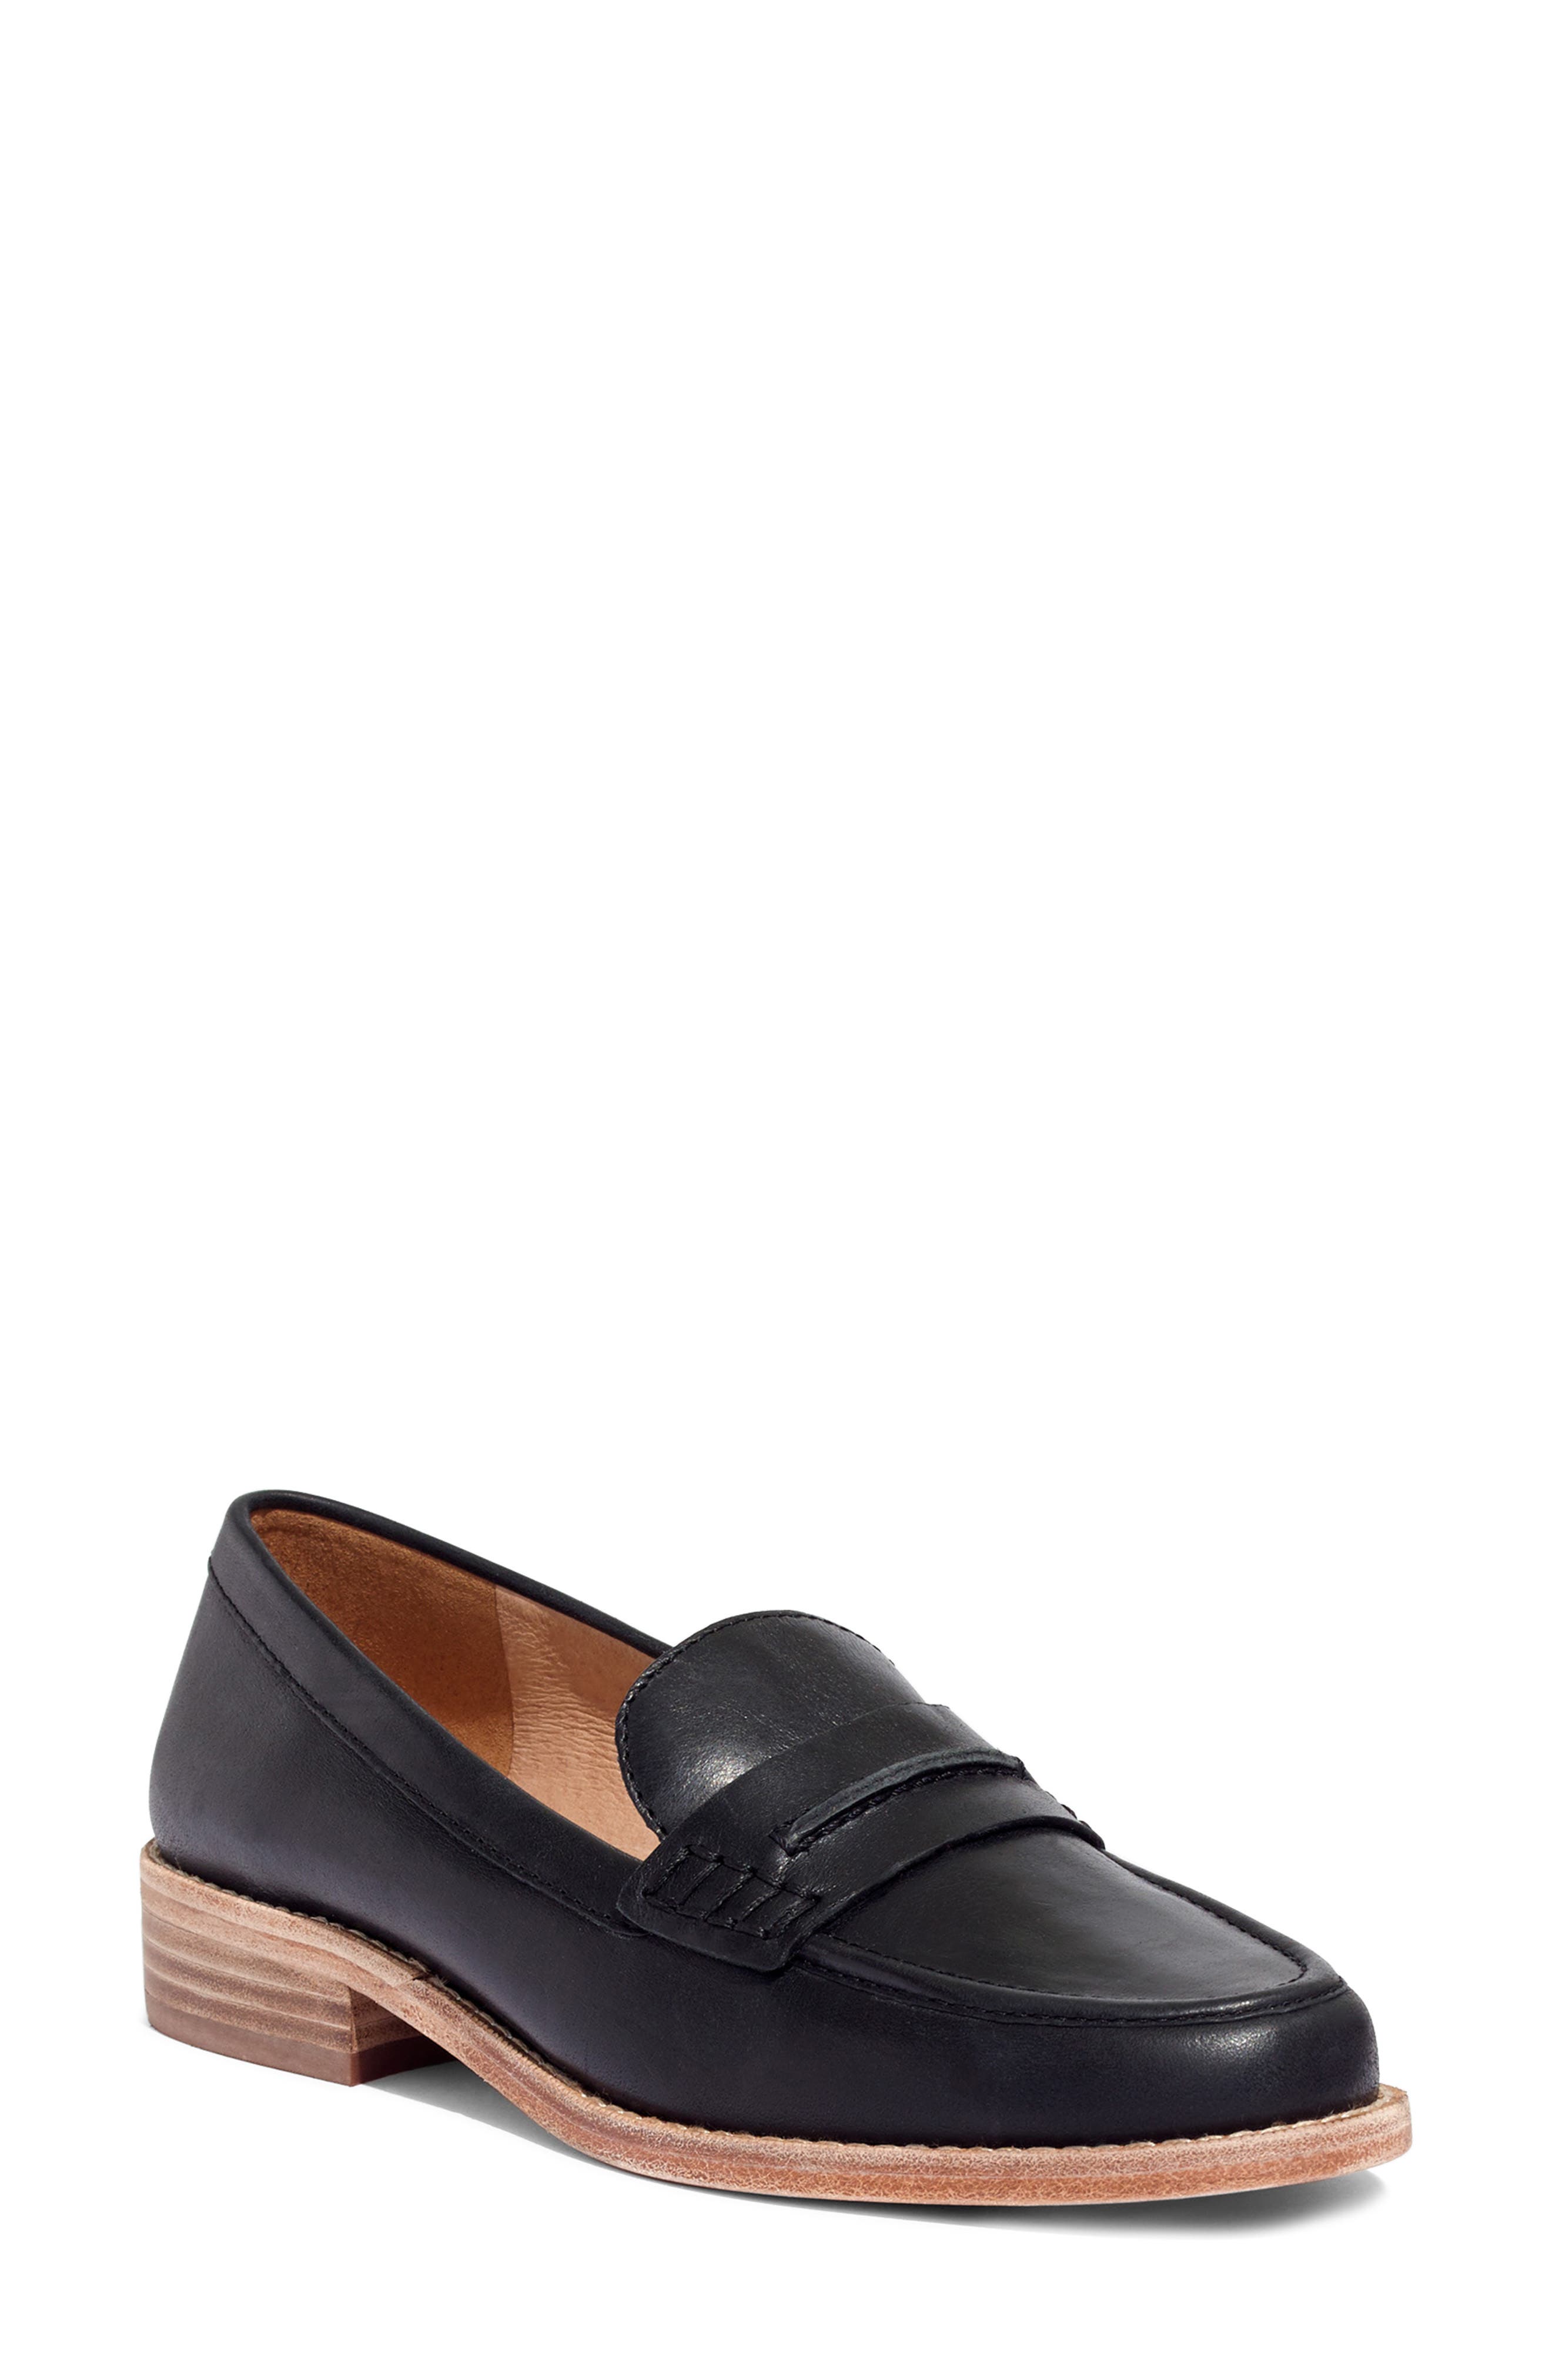 Madewell | The Elinor Loafer 